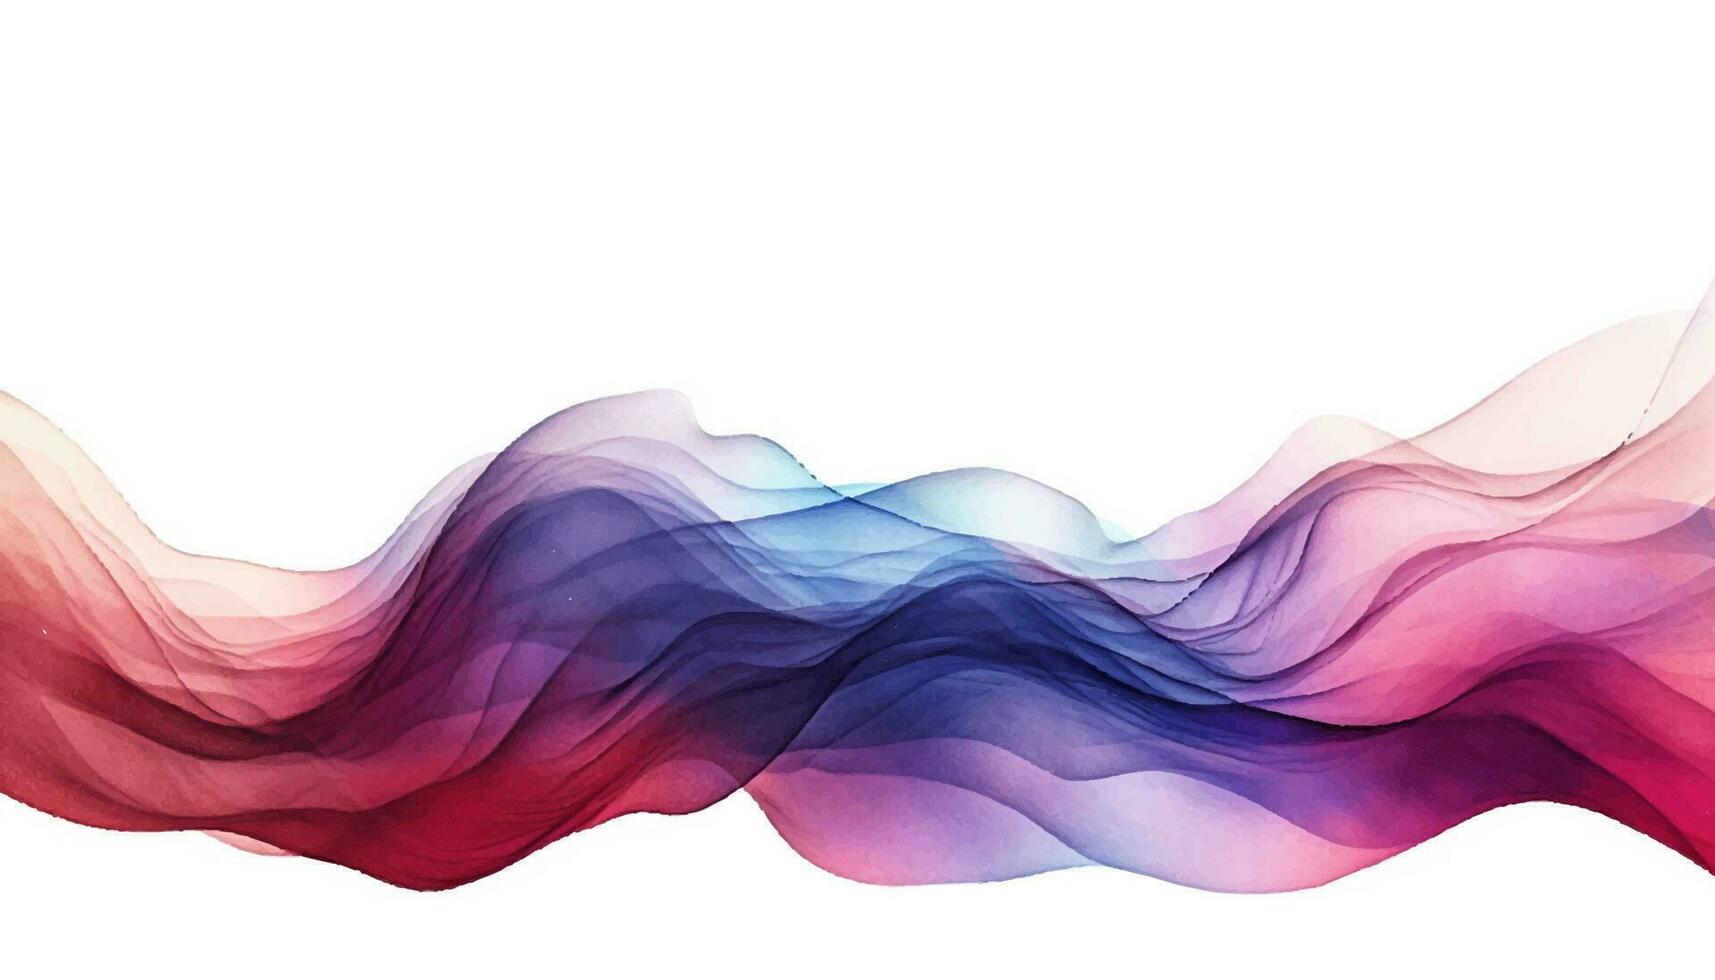 Abstract wave background. Vector illustration. Can be used for advertisingeting, presentation. Watercolor background. Rainbow colored waves.